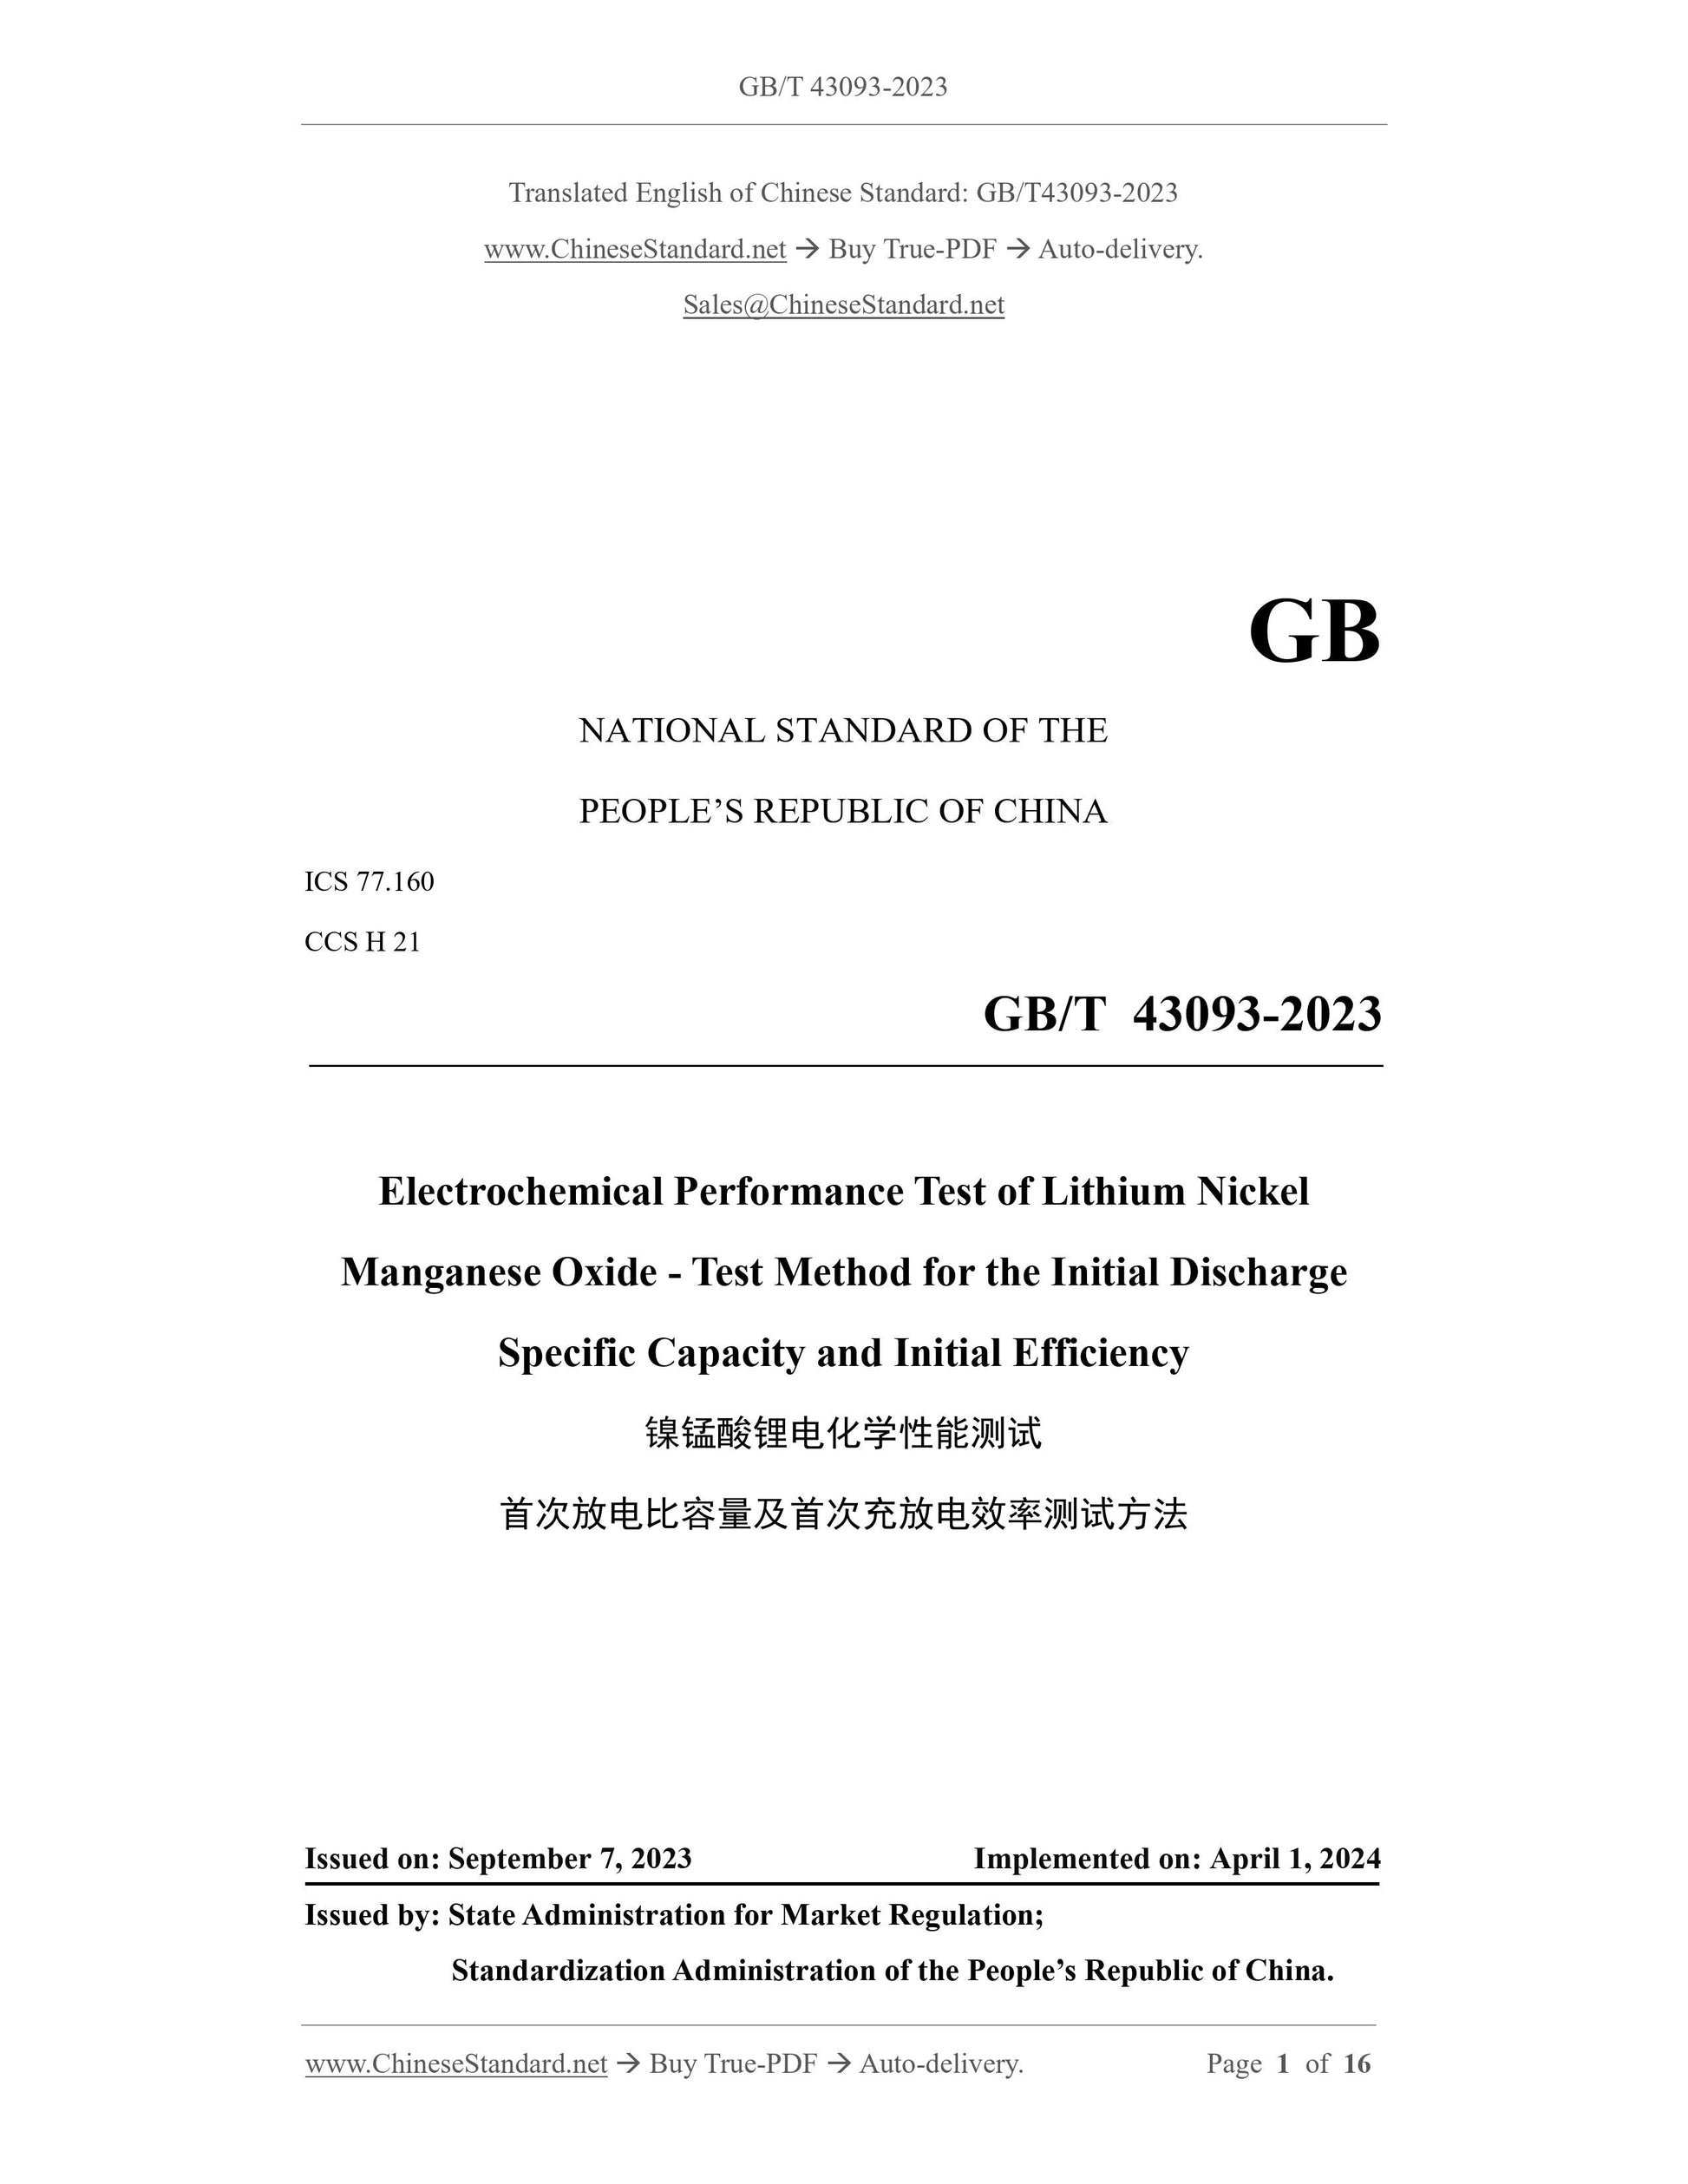 GB/T 43093-2023 Page 1